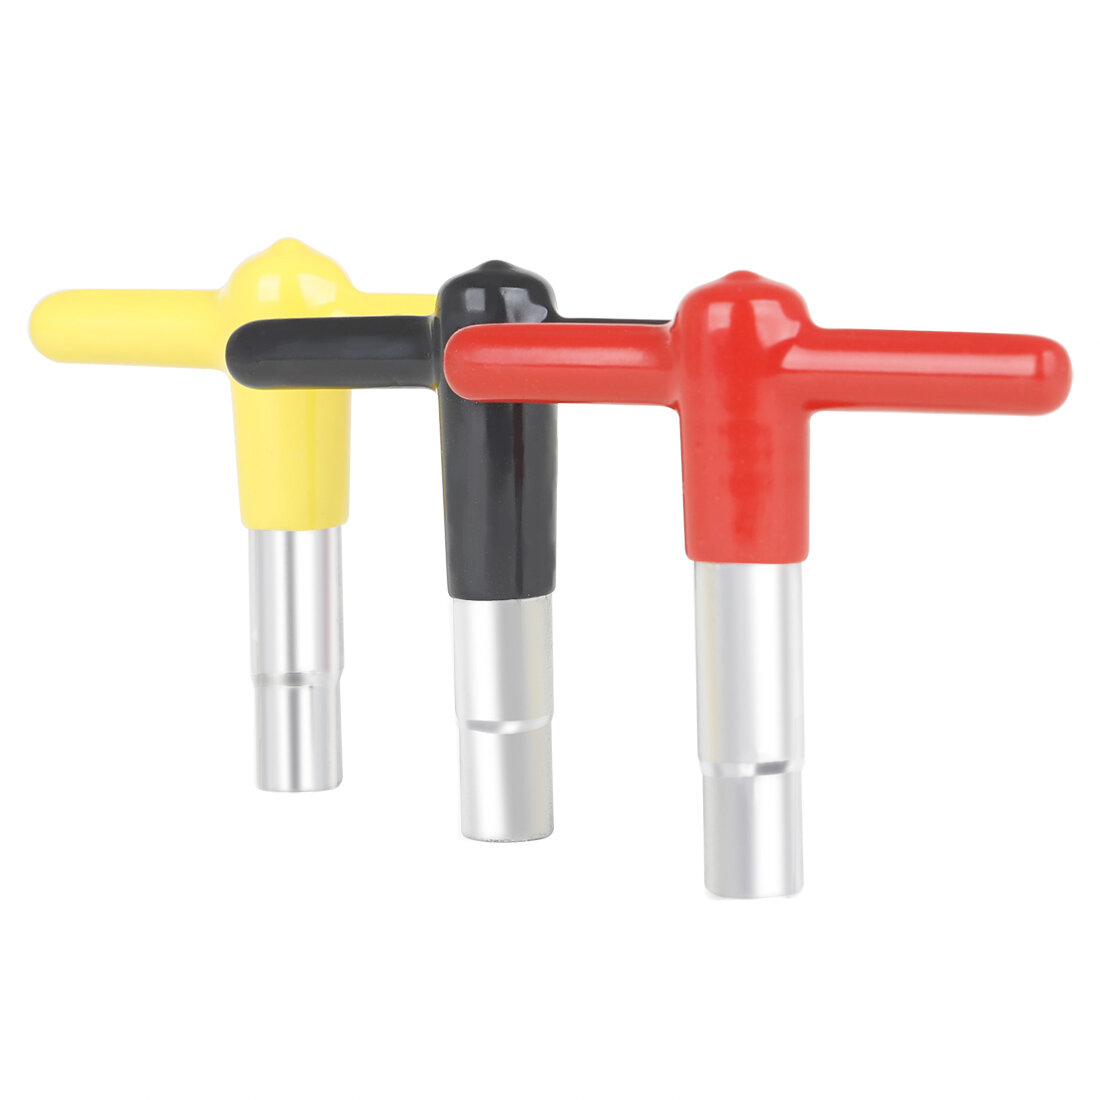 M MBAT High-Quality With Non-Slip Protective Set Drum Tuning Key Adjustment Key Metal Square Drum Sc